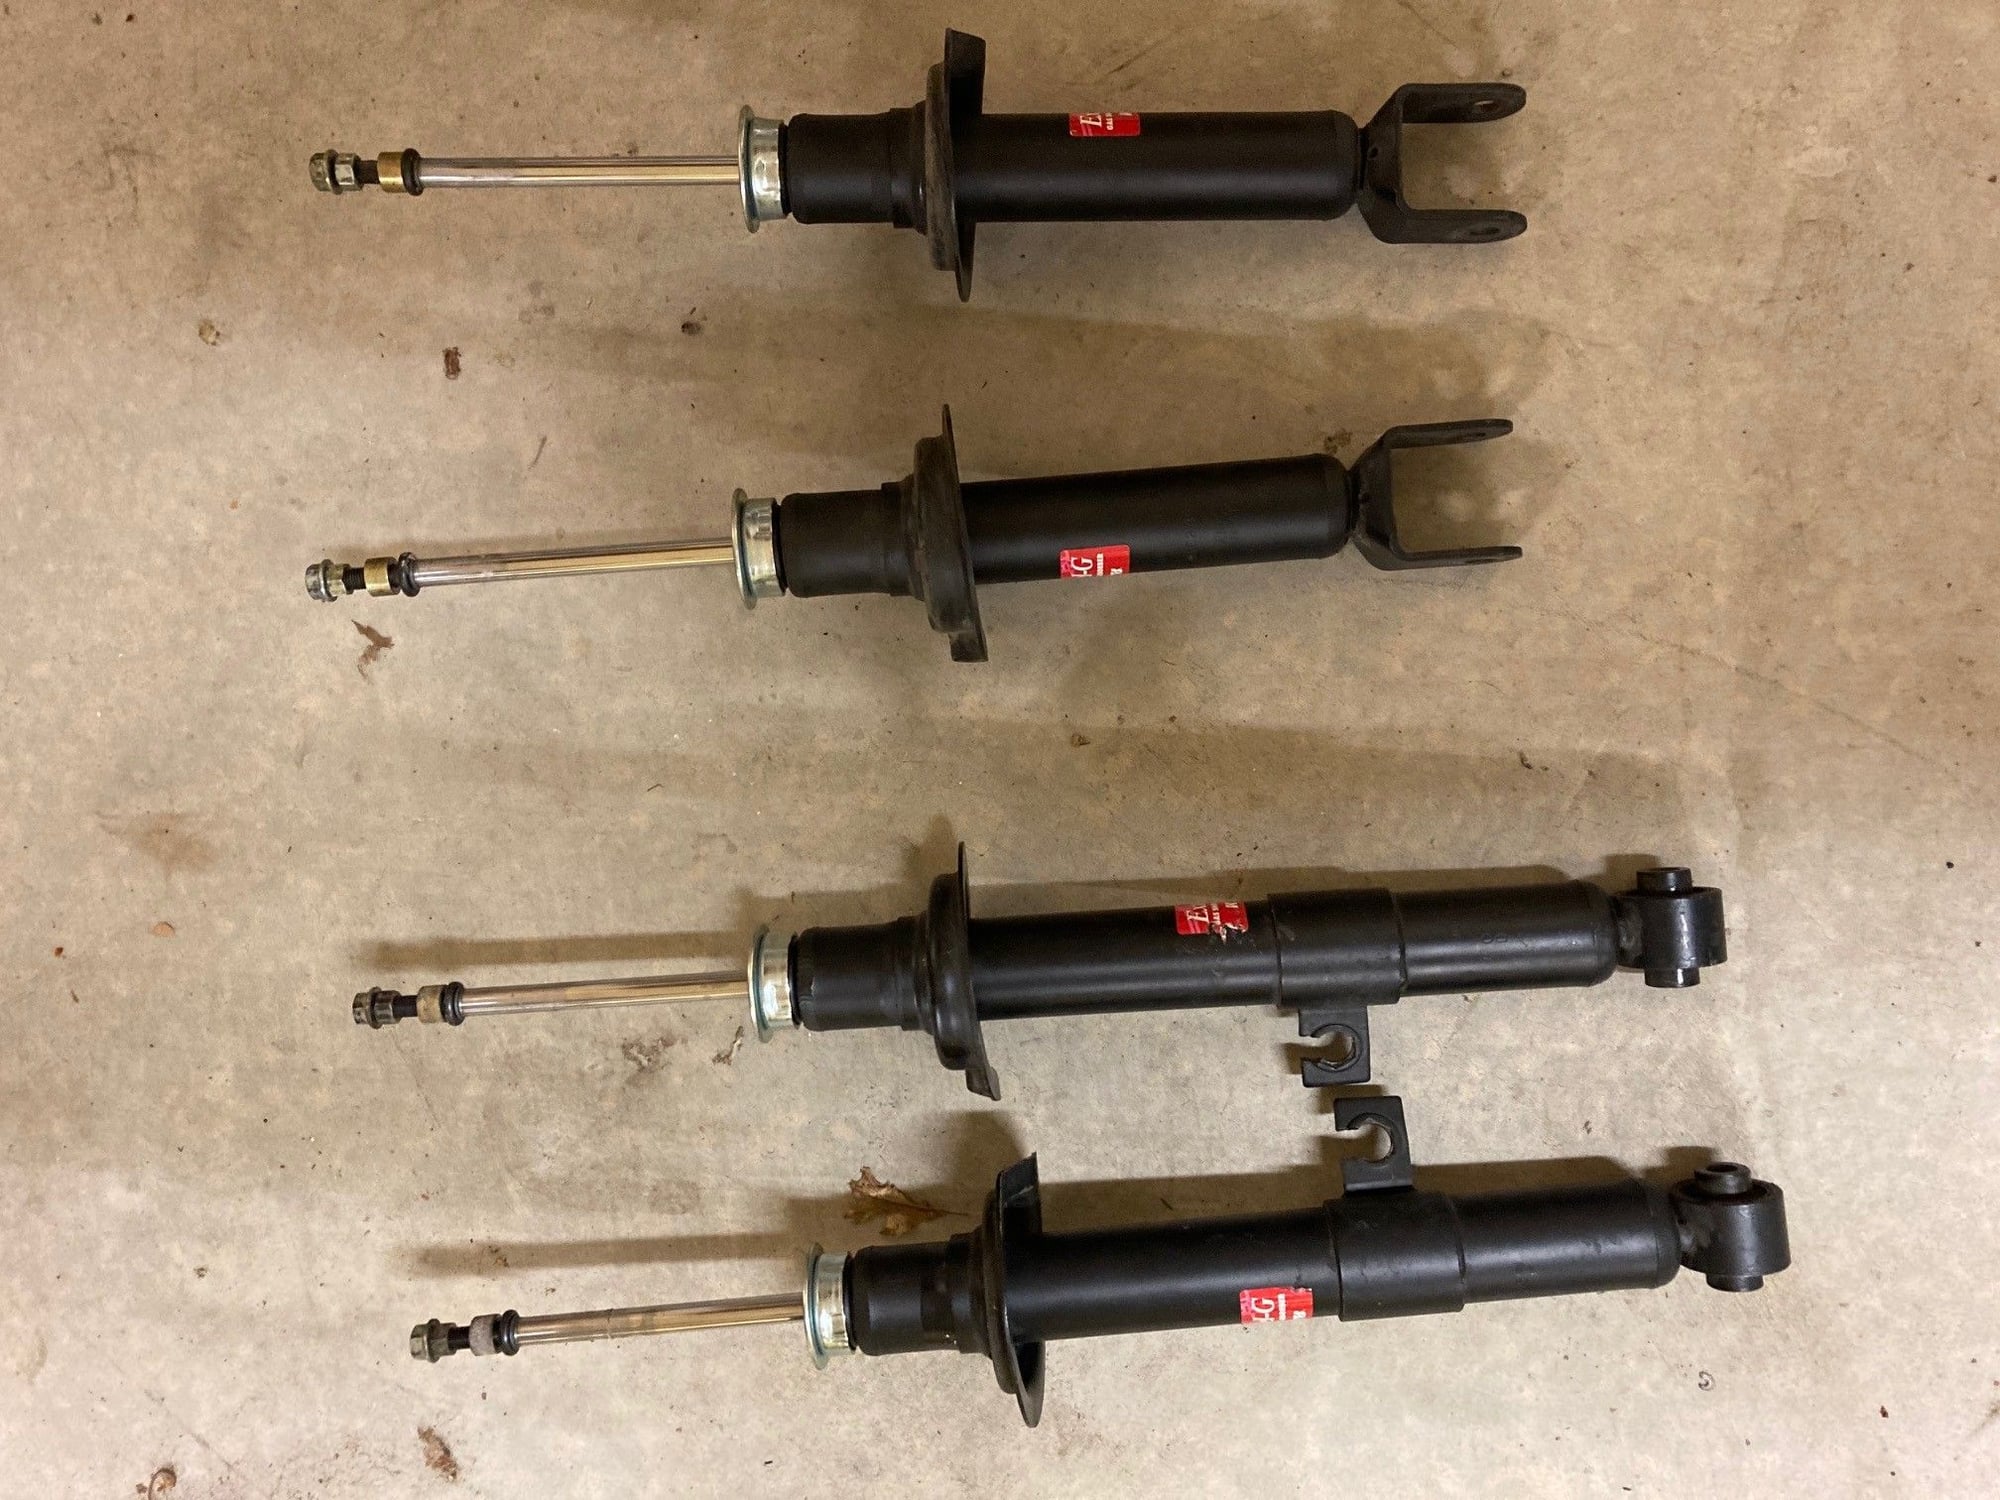 Steering/Suspension - KYB GR2 shocks and Eibach springs - Used - 1993 to 2002 Mazda RX-7 - Eugene, OR 97404, United States